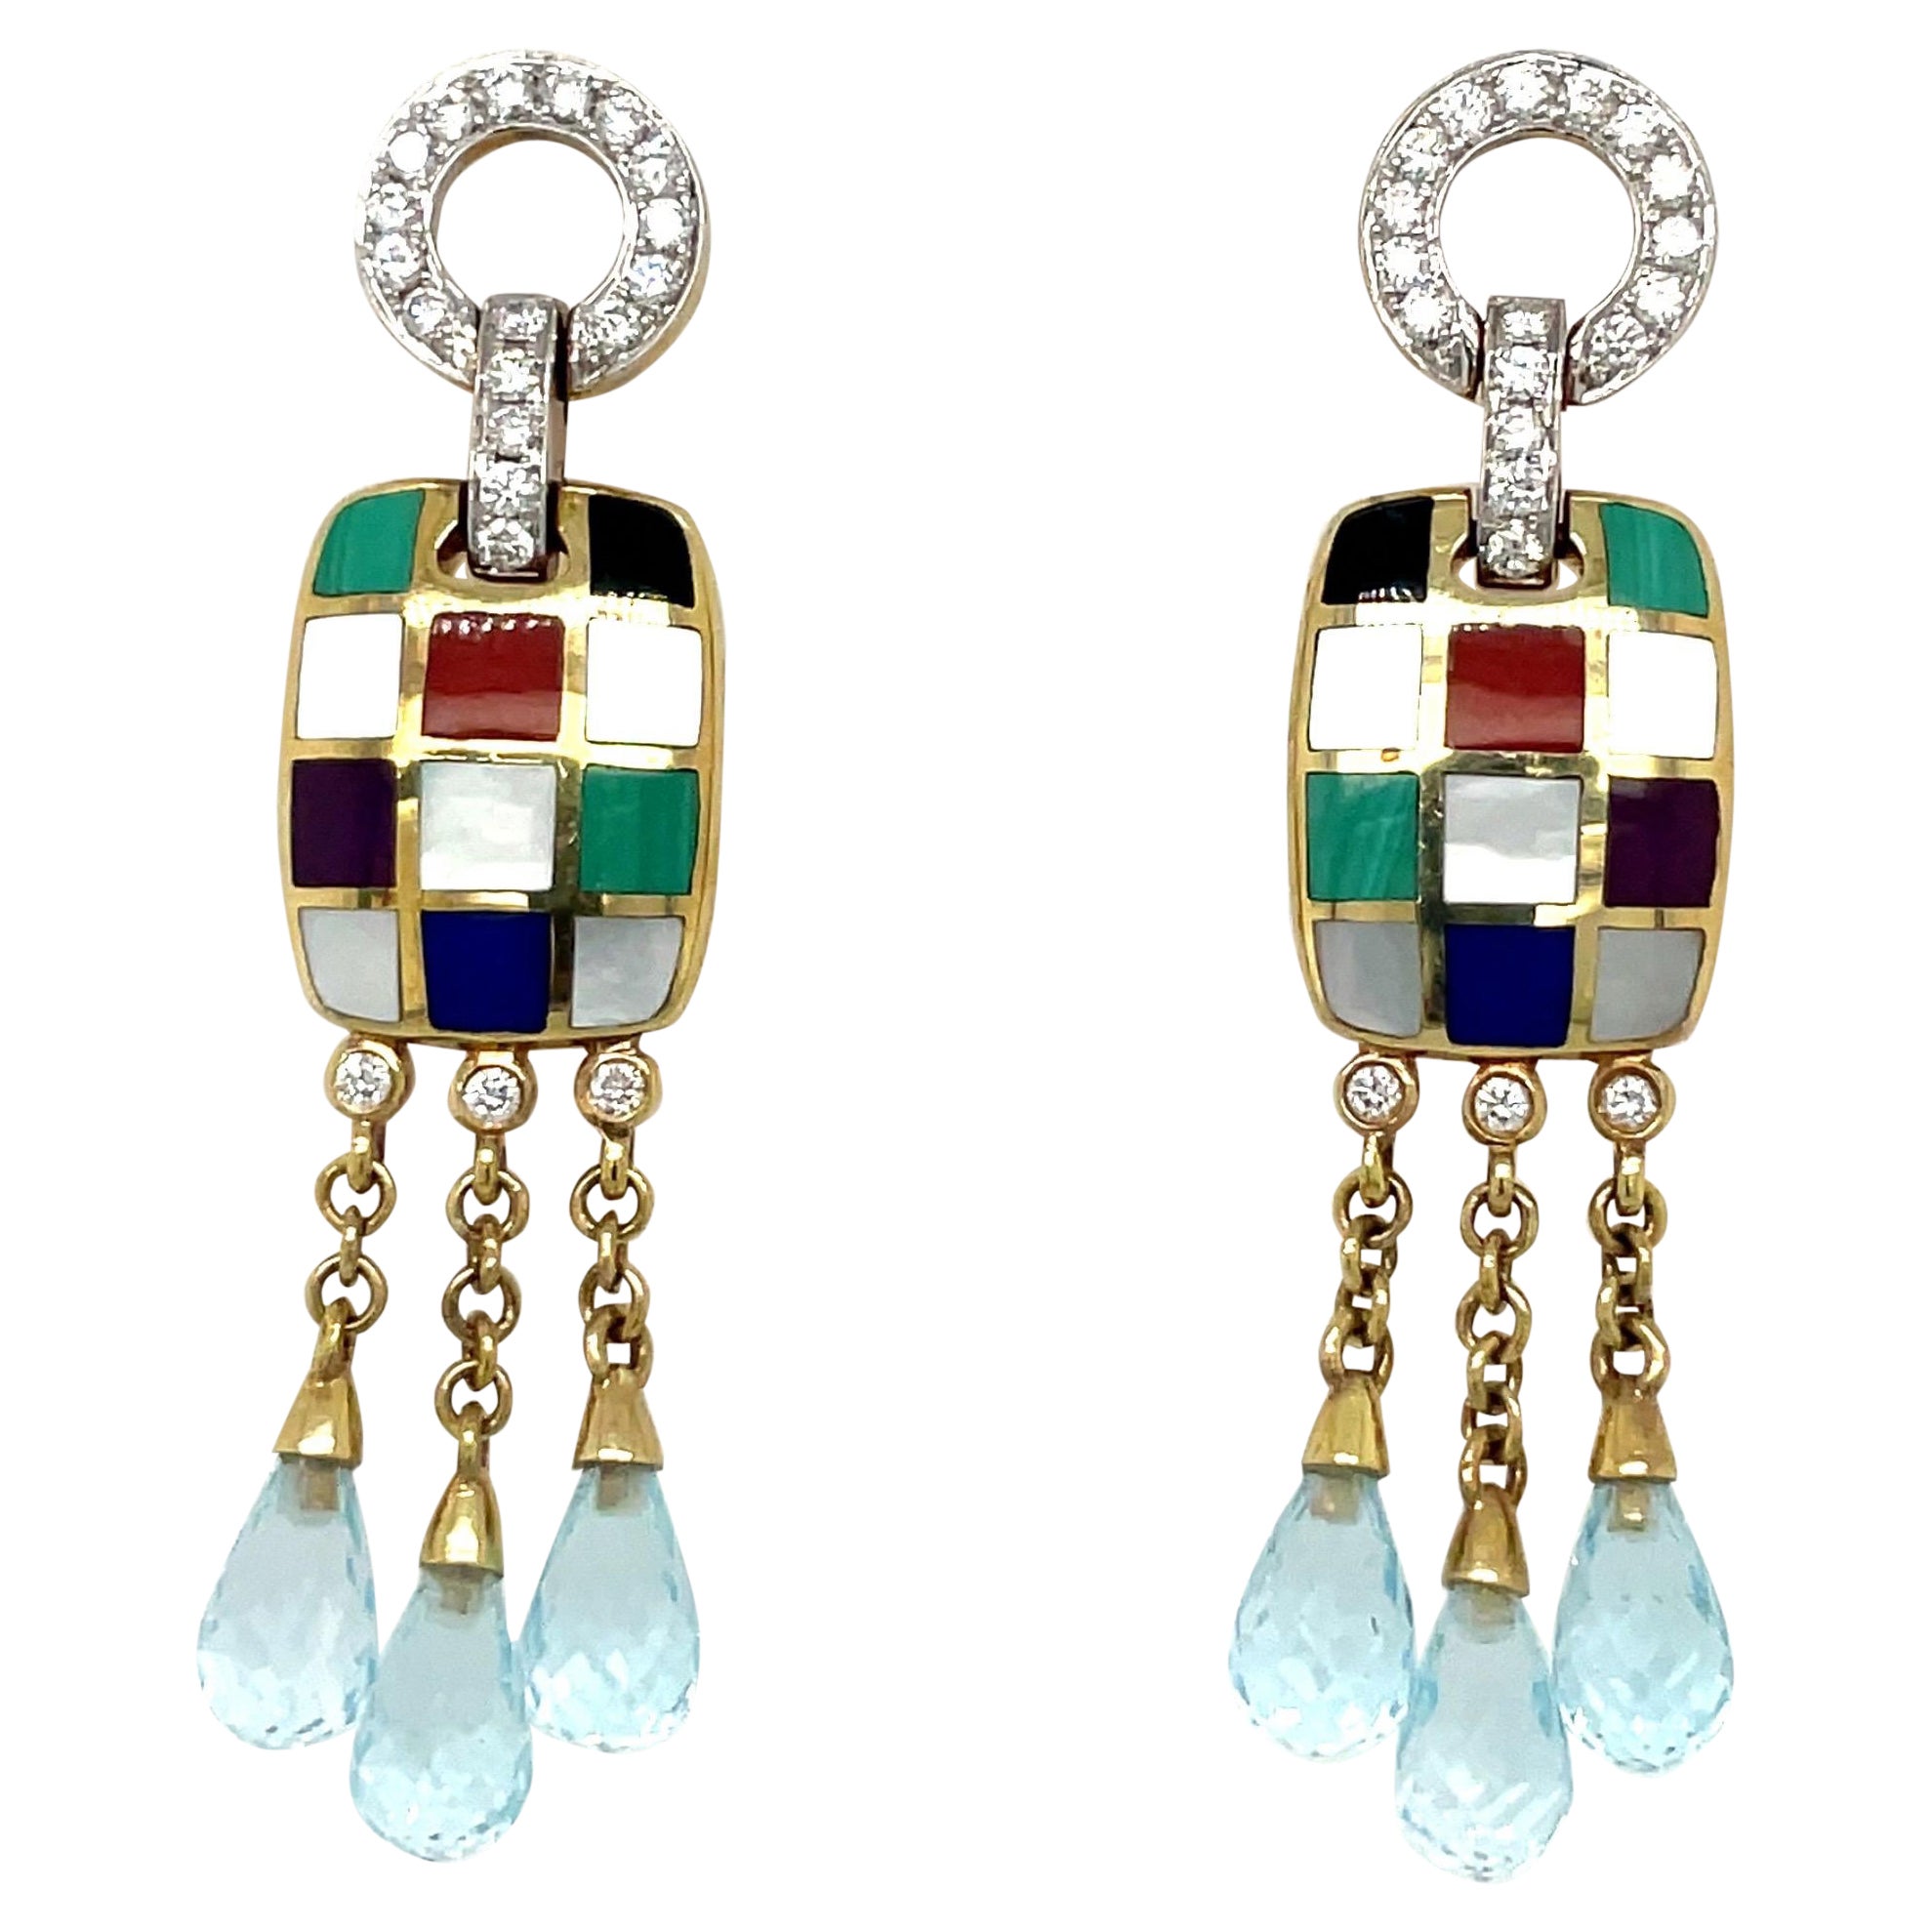 Asch Grossbardt 18KT YG .40 Ct Diamond & Inlaid Stone Hanging Earrings For Sale